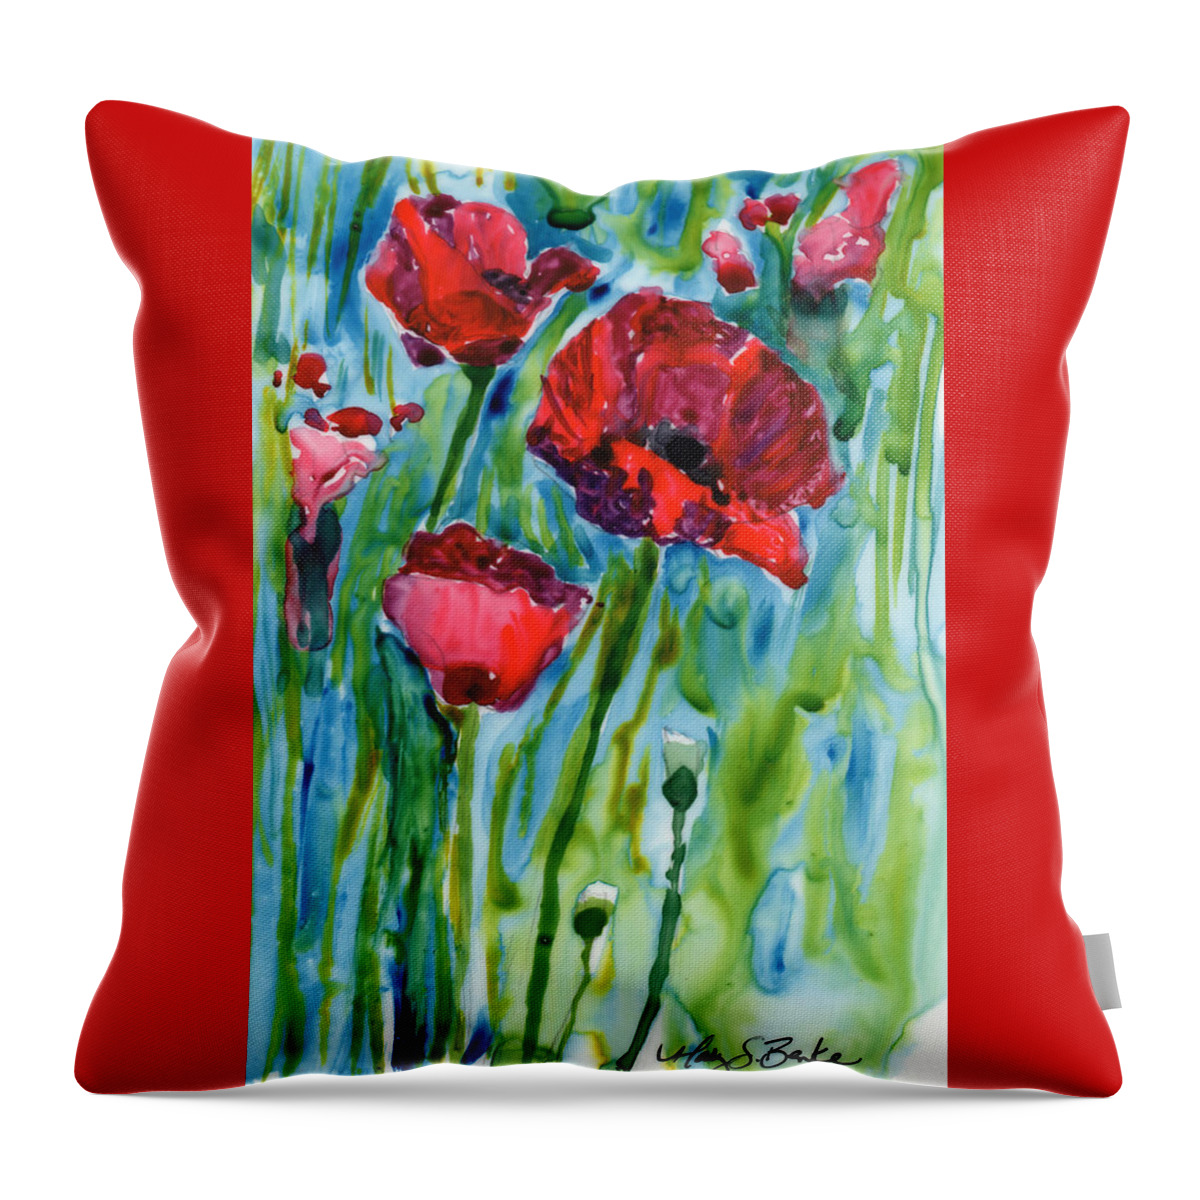 Abstract Throw Pillow featuring the painting After the Rain by Mary Benke